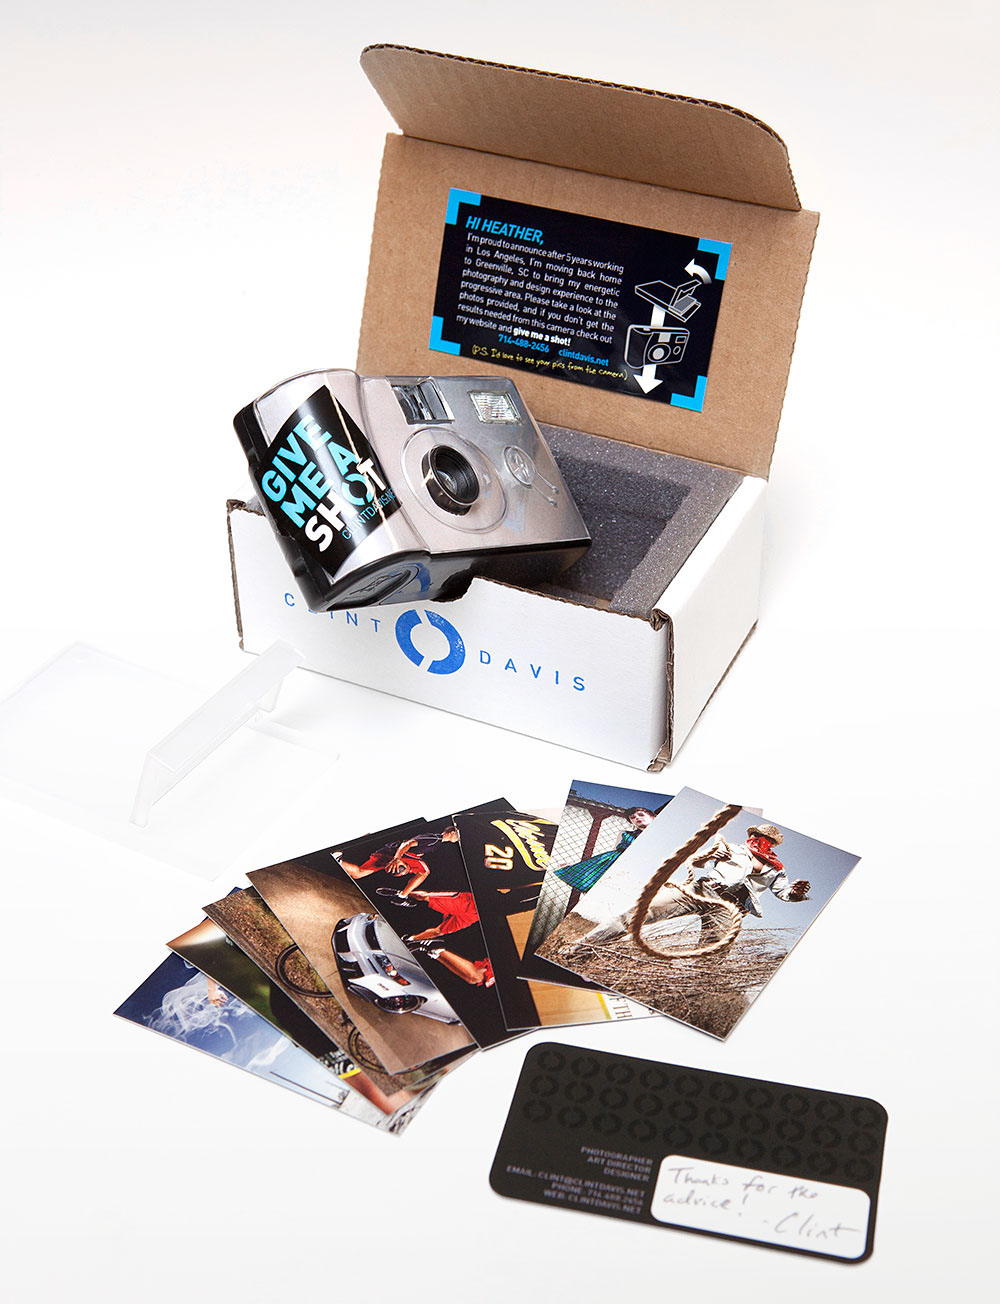 Self-promo self-promotion mailer moo cards disposable camera self advertising